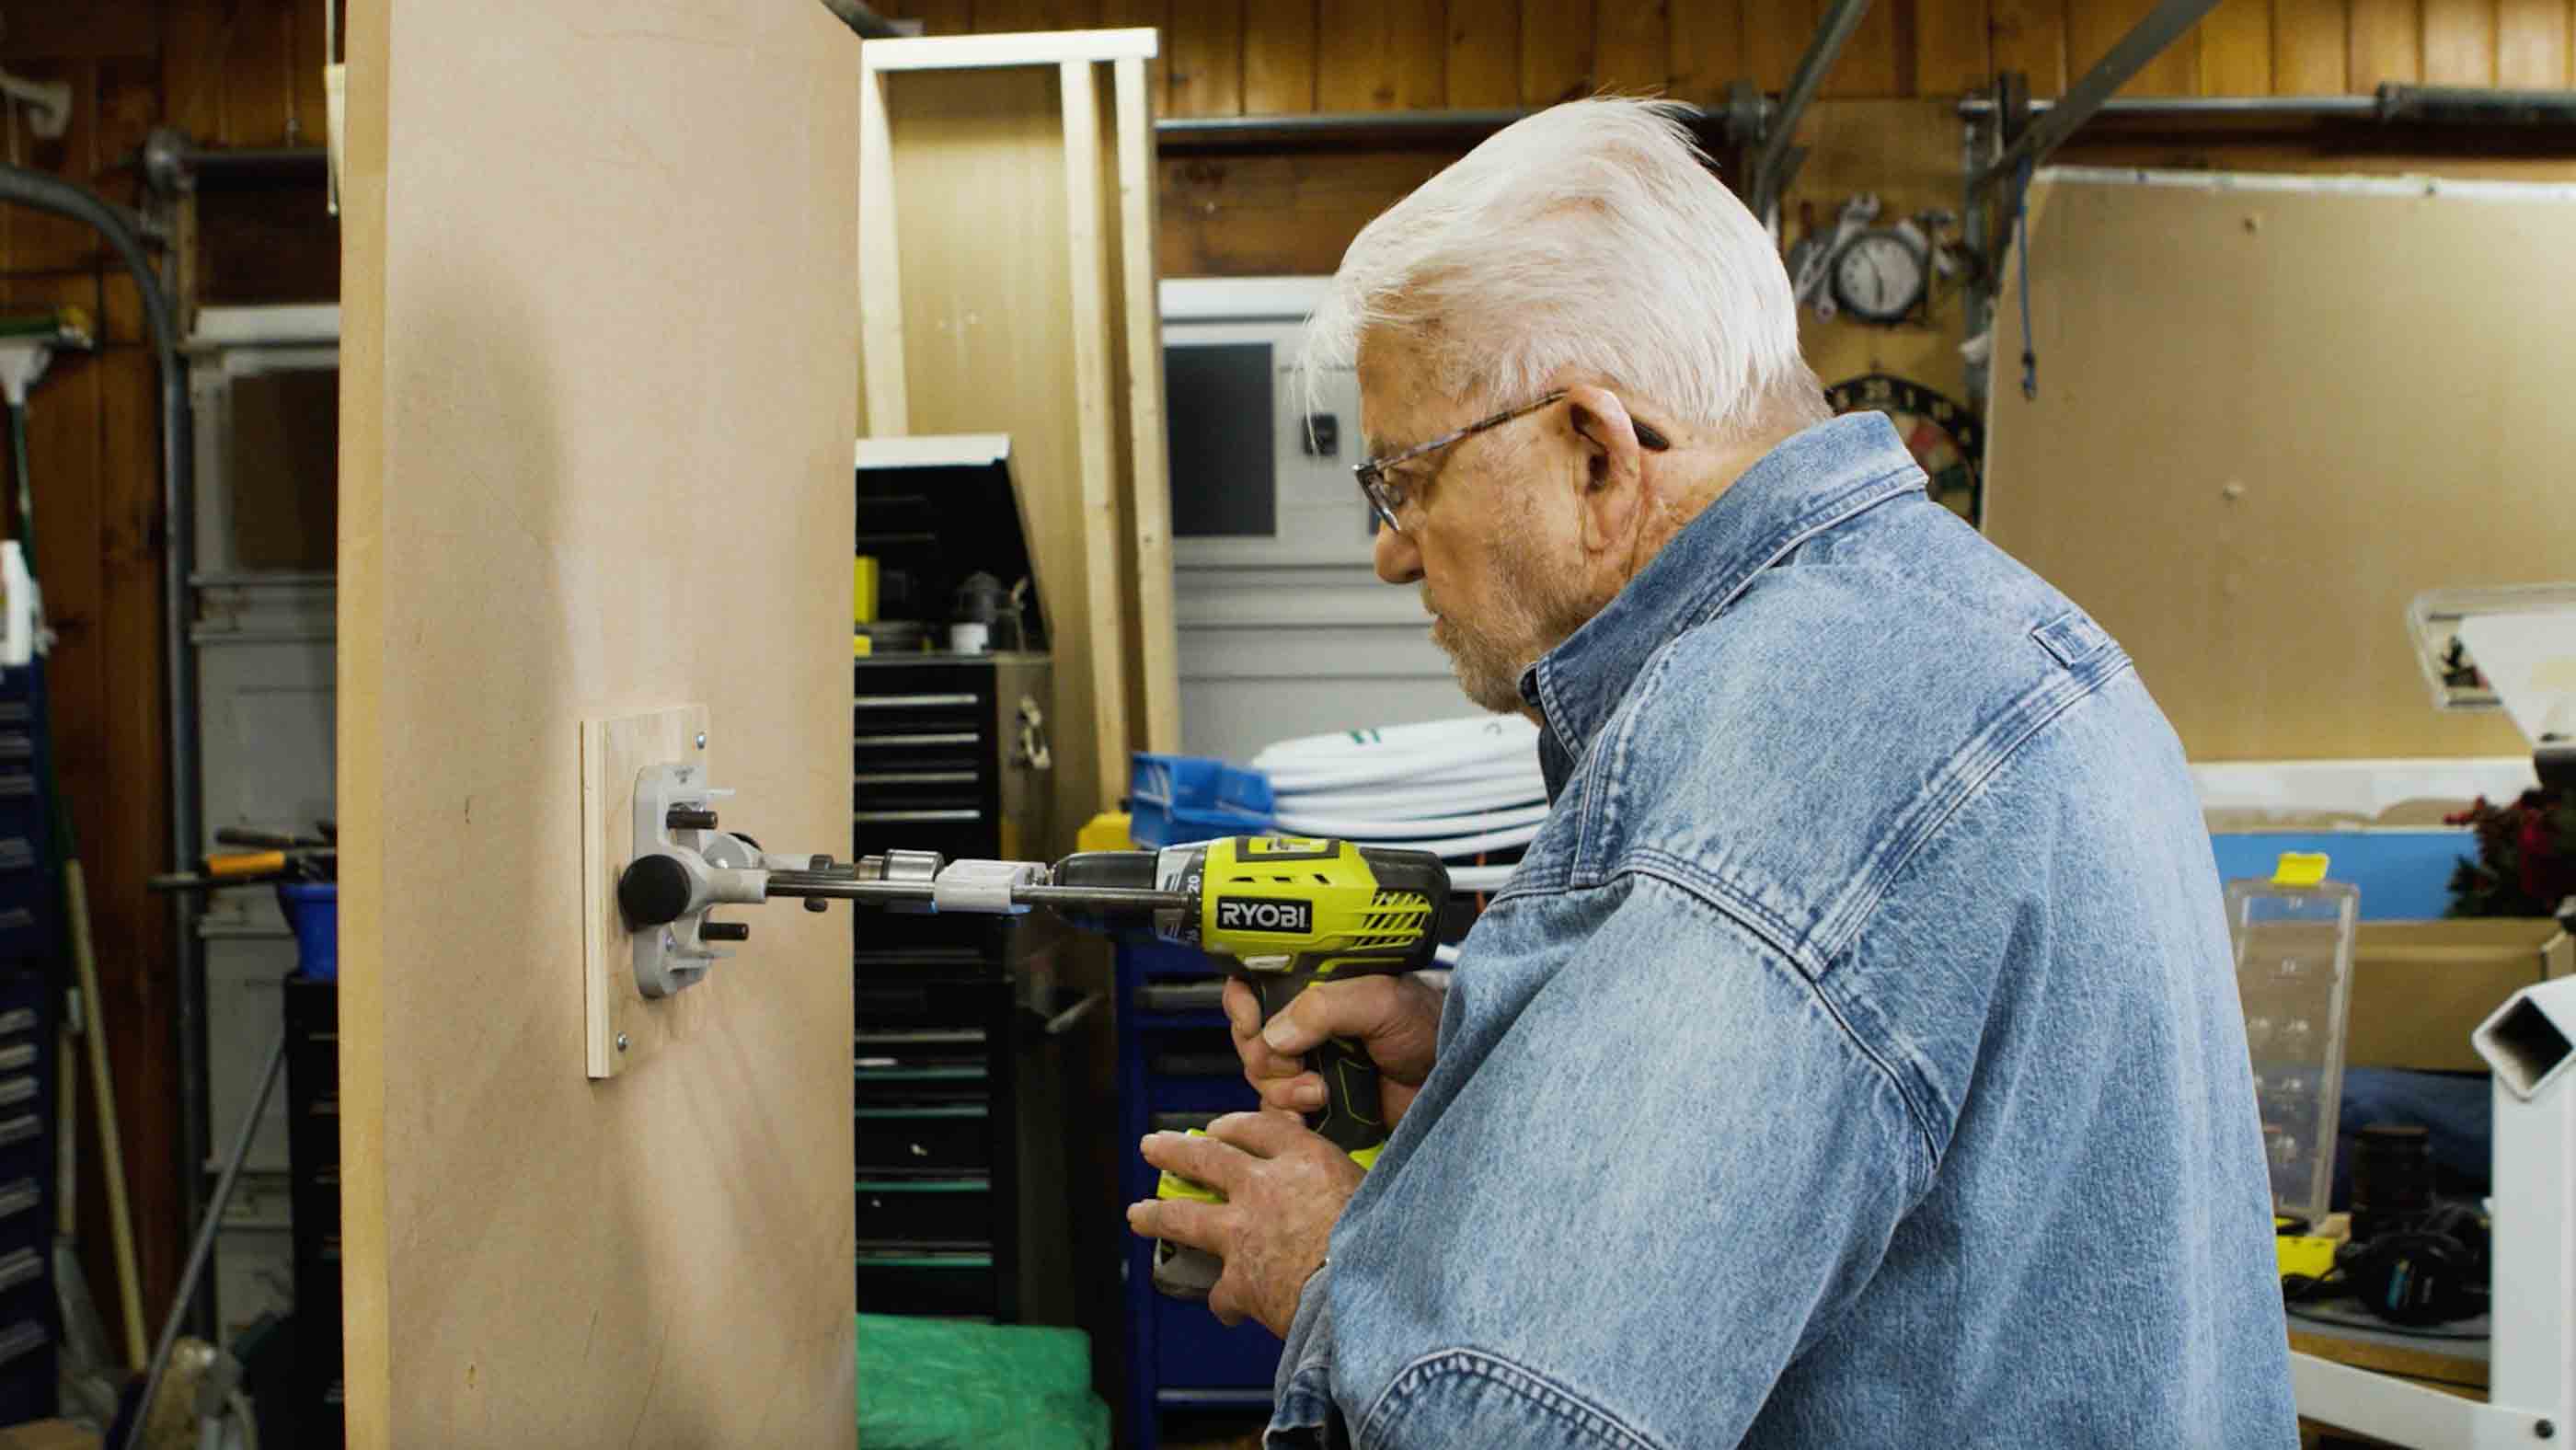 Man uses portable drill press to drill into a vertical surface